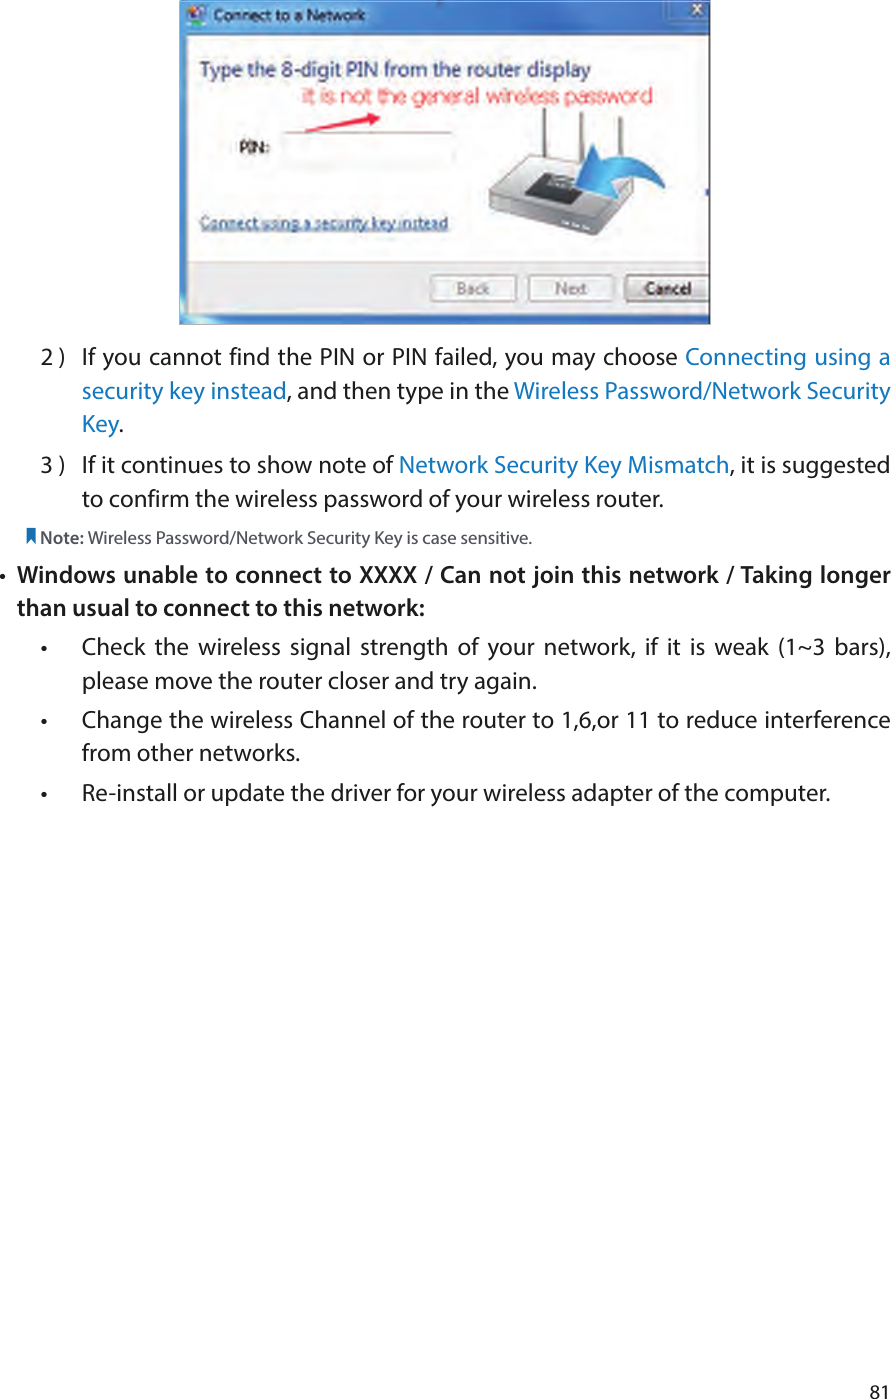 812 )  If you cannot find the PIN or PIN failed, you may choose Connecting using a security key instead, and then type in the Wireless Password/Network Security Key.3 )  If it continues to show note of Network Security Key Mismatch, it is suggested to confirm the wireless password of your wireless router.  Note: Wireless Password/Network Security Key is case sensitive.•  Windows unable to connect to XXXX / Can not join this network / Taking longer than usual to connect to this network:•  Check the wireless signal strength of your network, if it is weak (1~3 bars), please move the router closer and try again.•  Change the wireless Channel of the router to 1,6,or 11 to reduce interference from other networks.•  Re-install or update the driver for your wireless adapter of the computer.